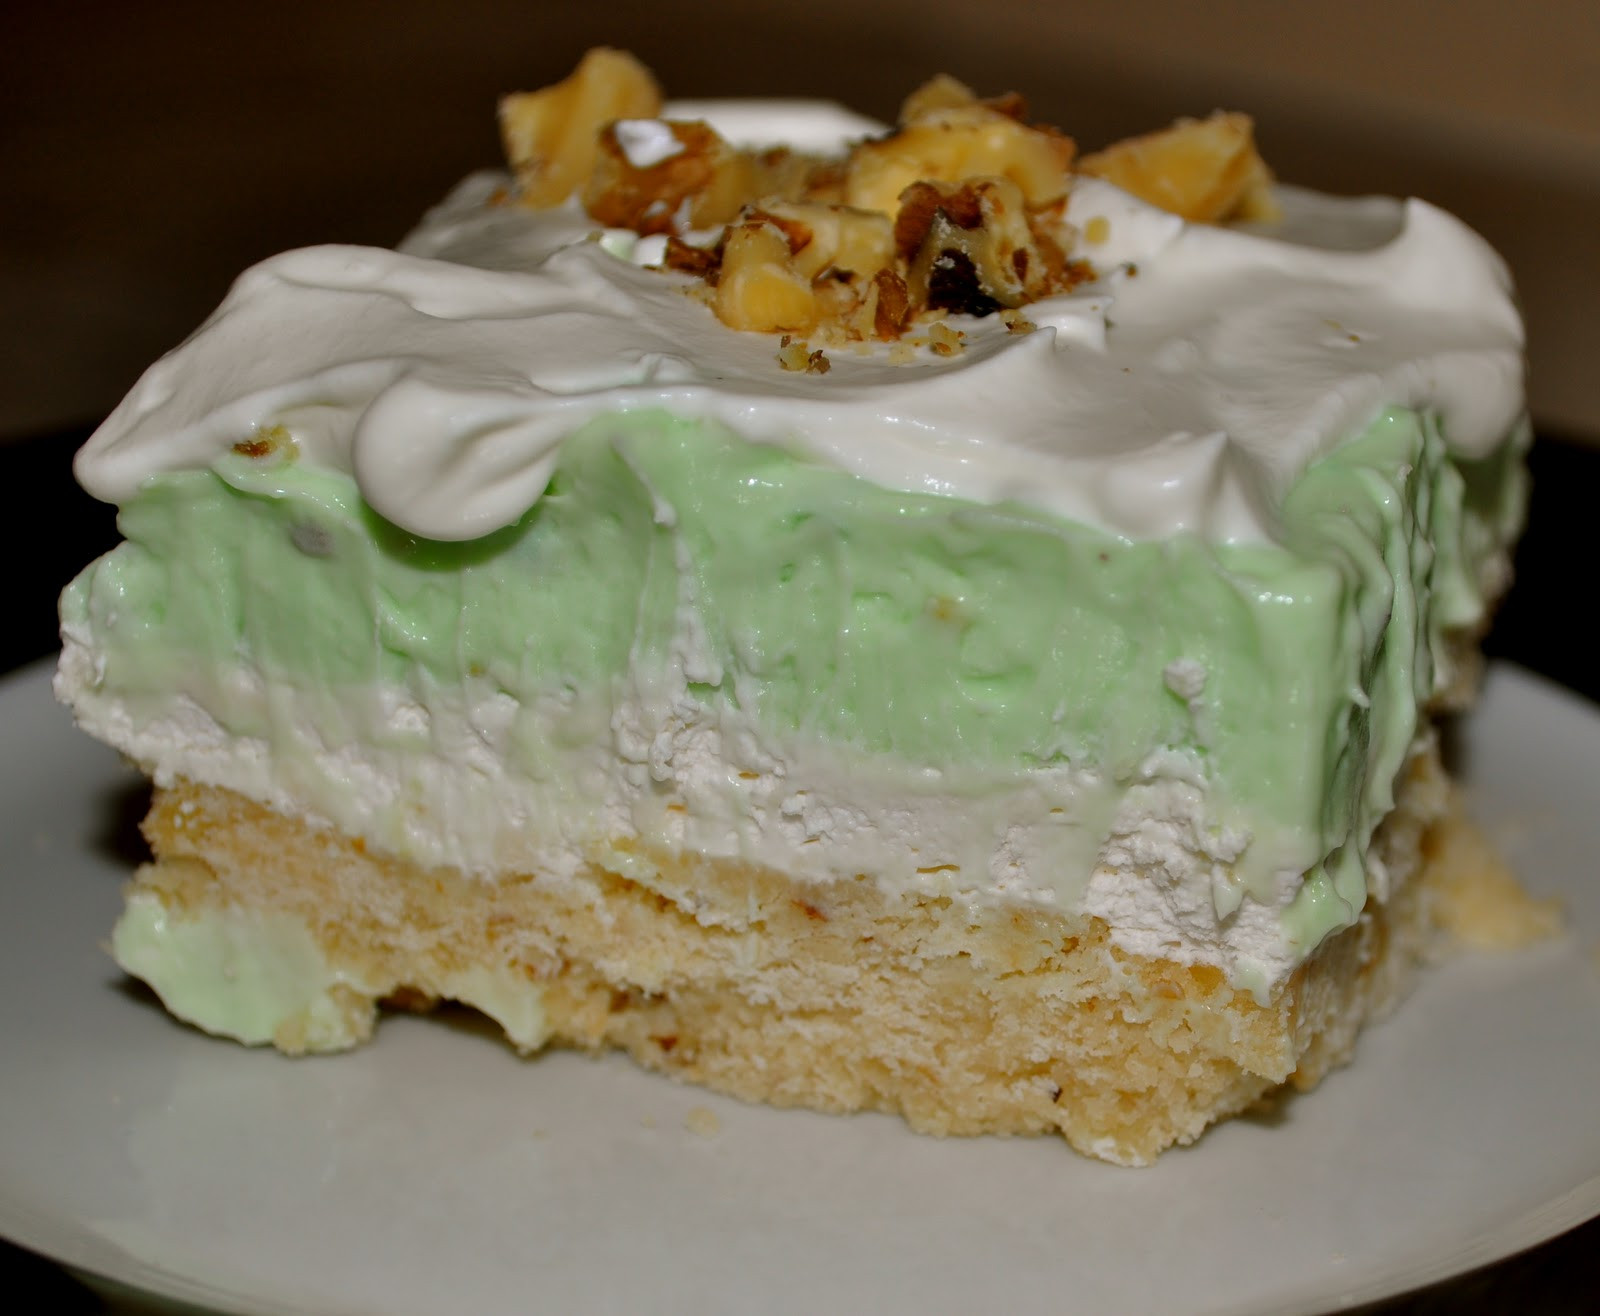 Pistachio Pudding Dessert
 Inspiring Creations Food For Thought Tuesday Pistachio